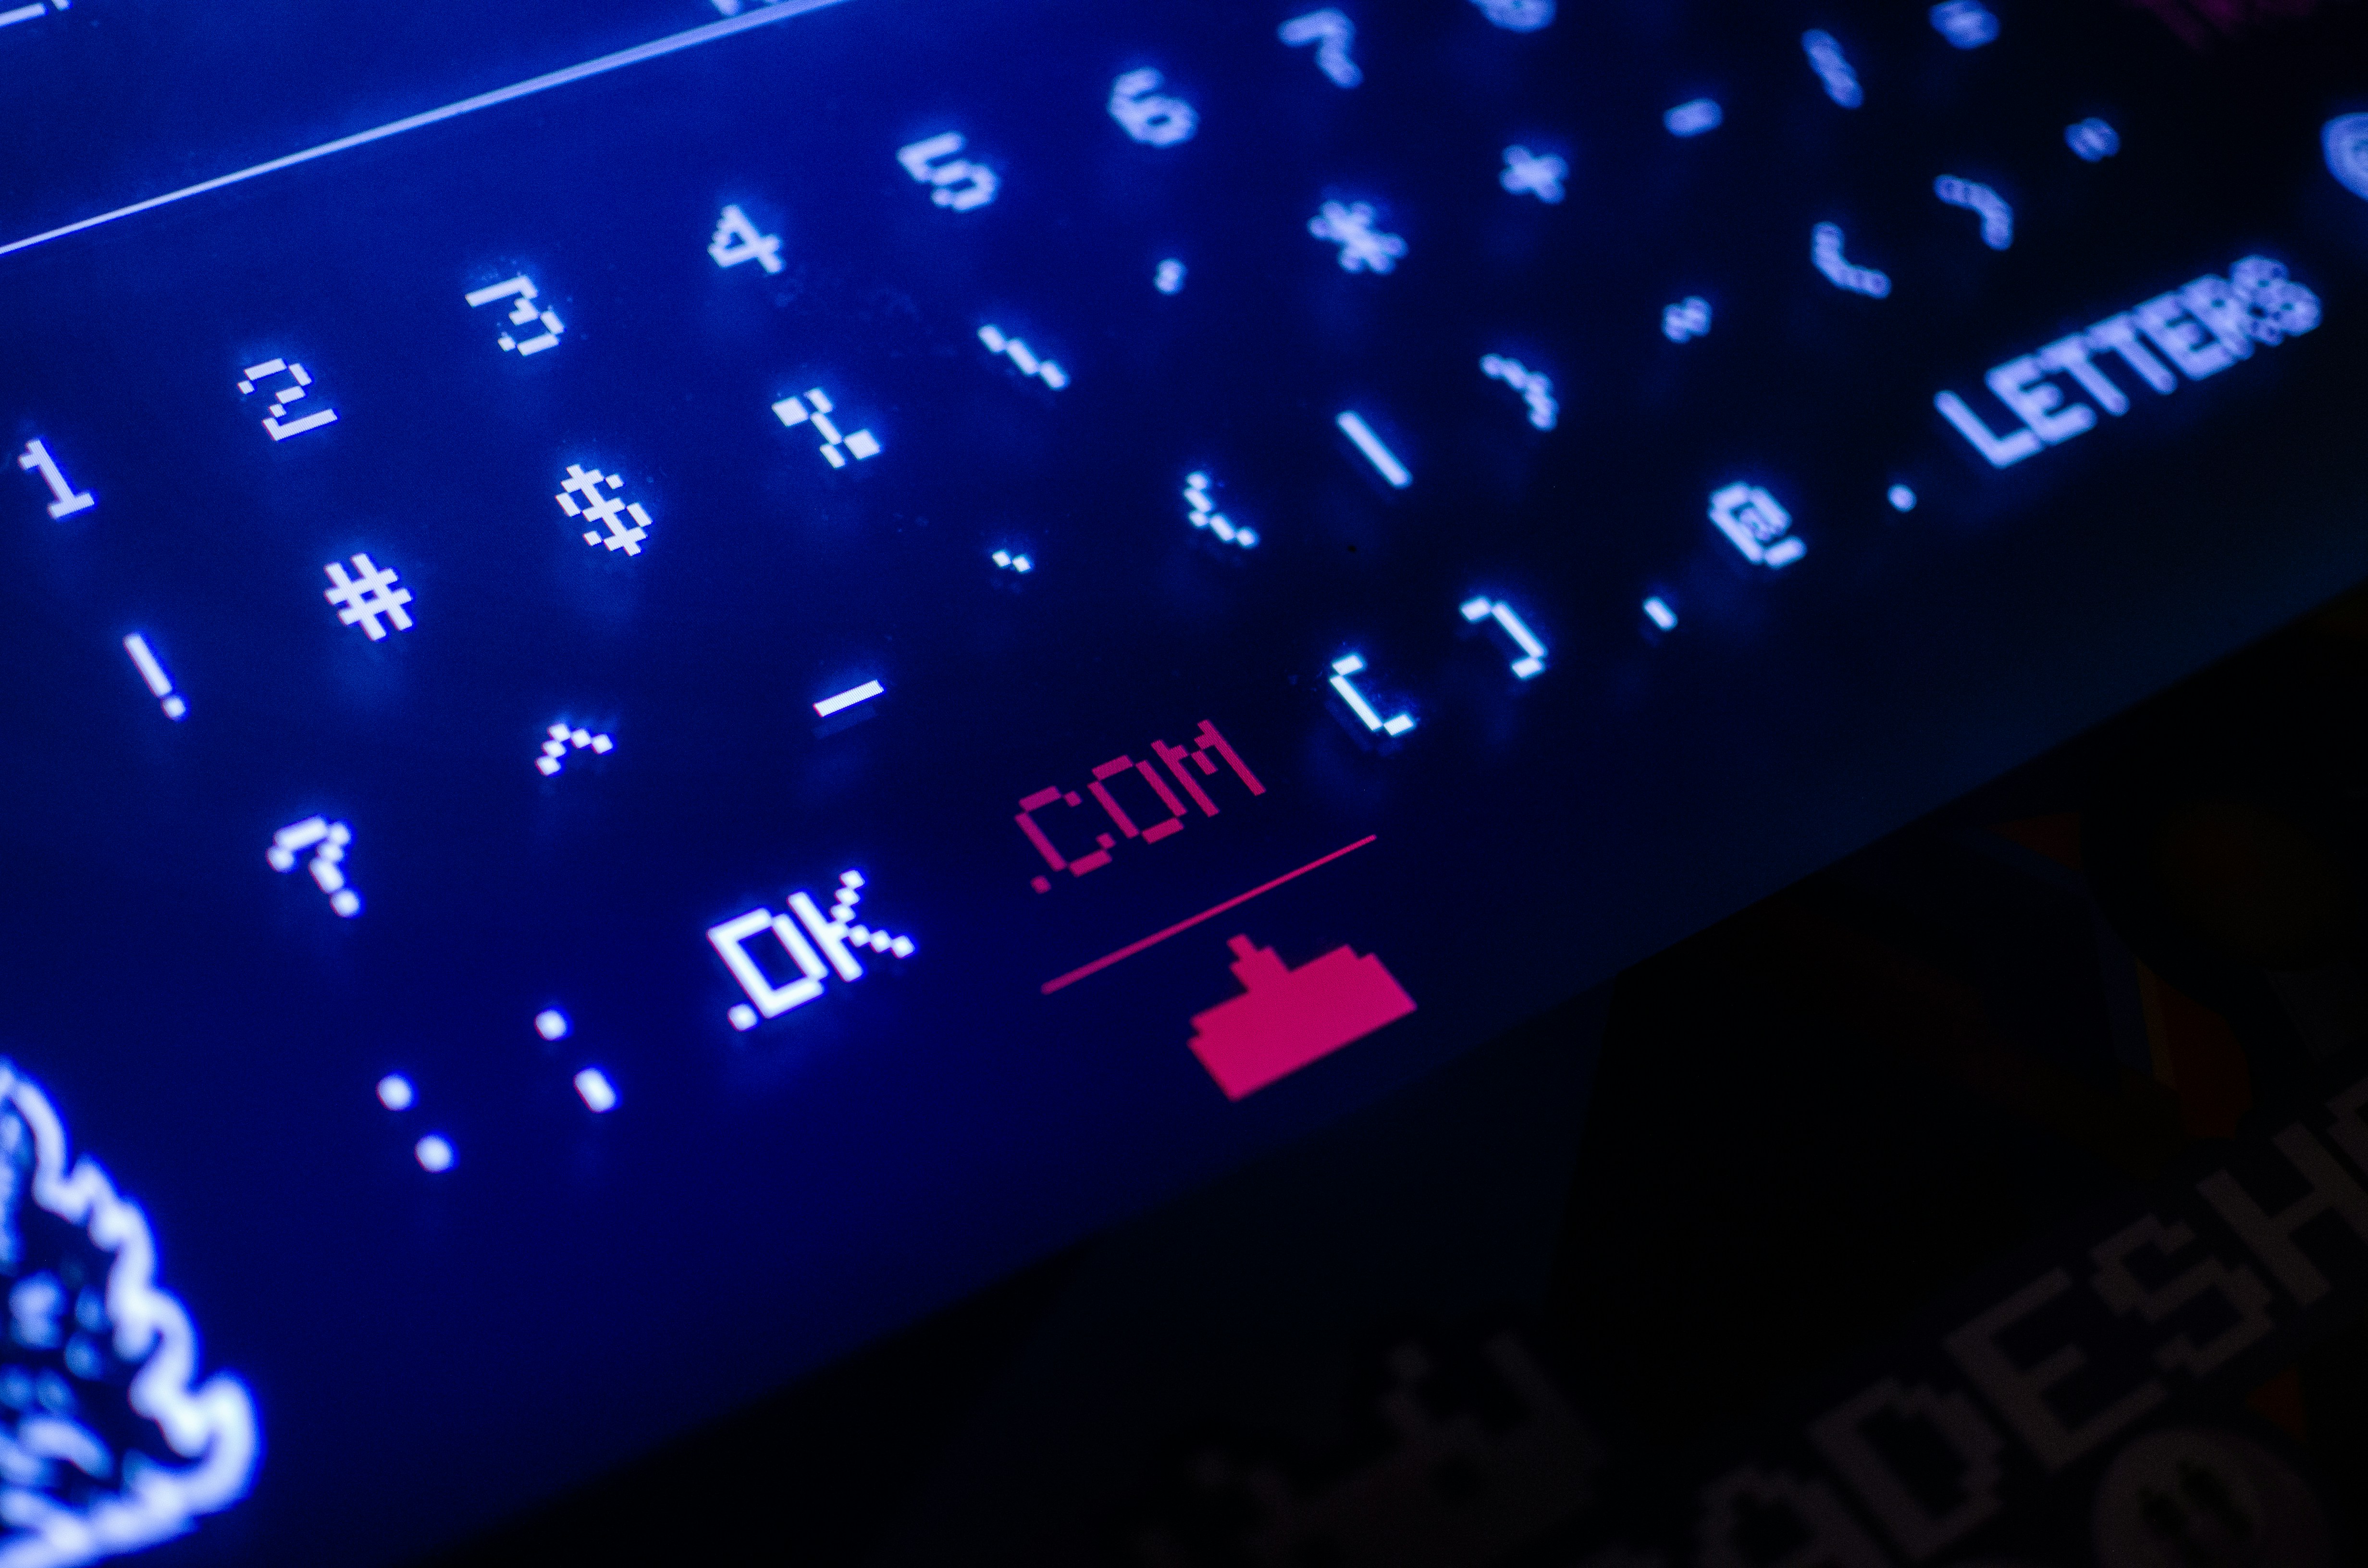 black and blue computer keyboard highlighting a .com which is a top level domain.